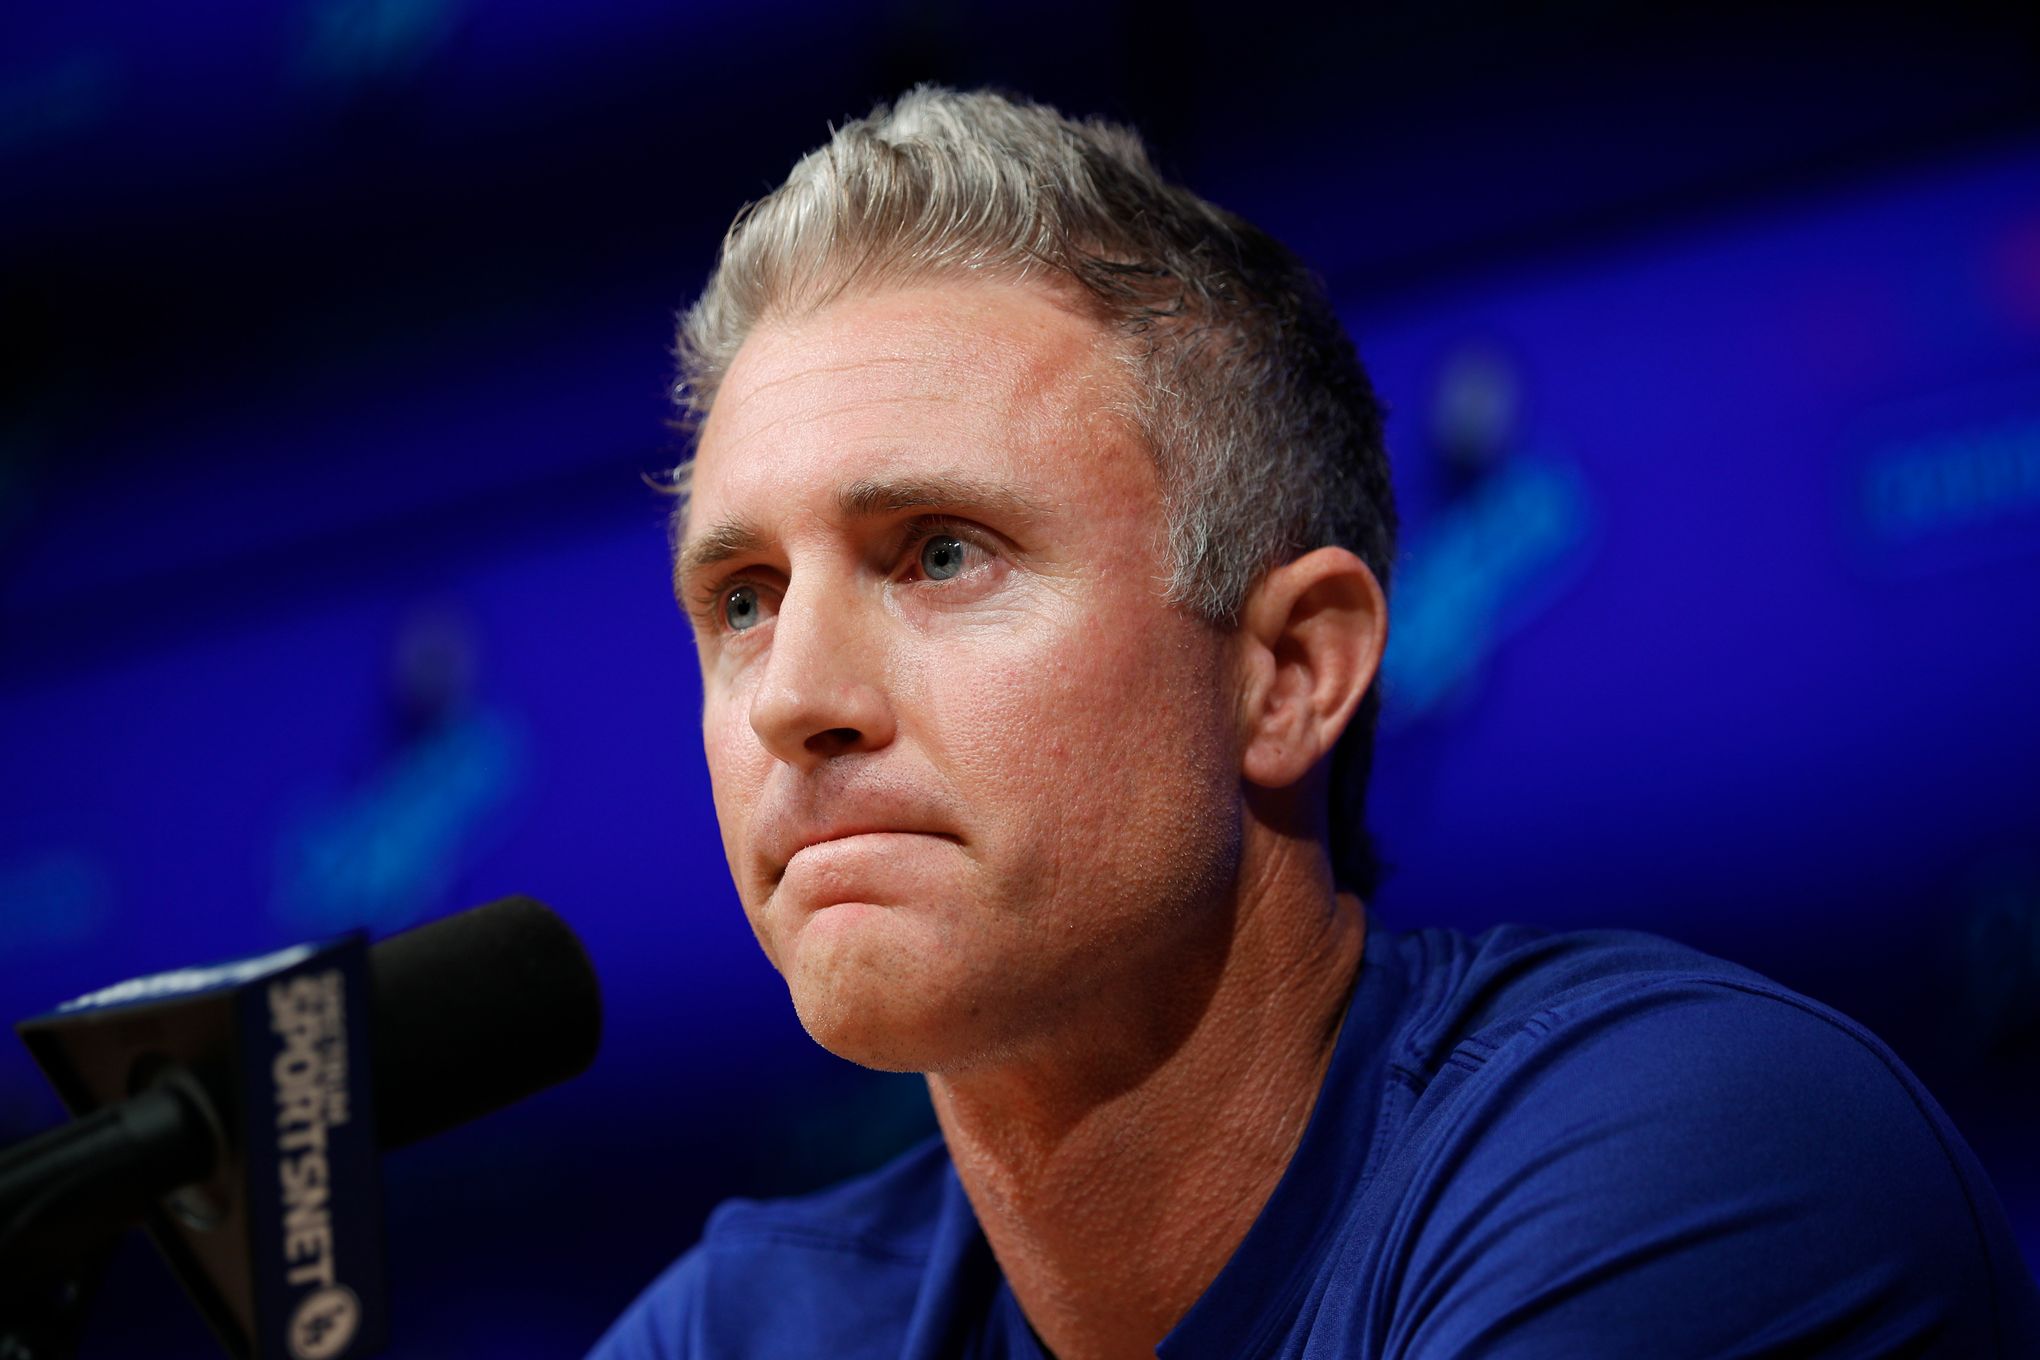 Chase Utley to Retire at End of 2018 Season – Think Blue Planning Committee